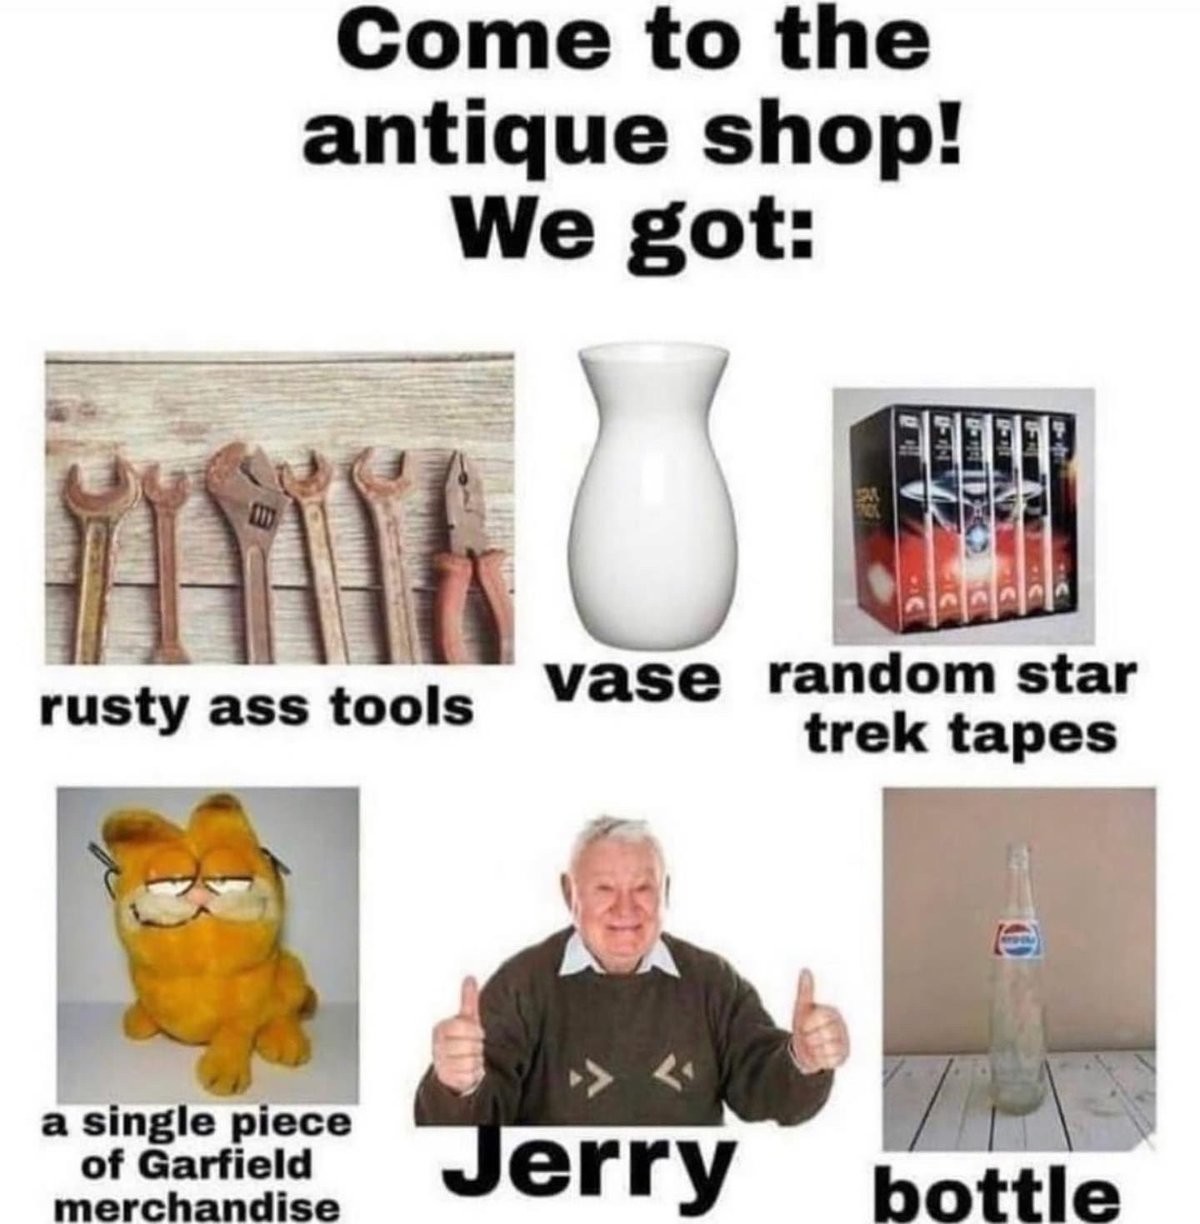 jerry. .. How much for Jerry?